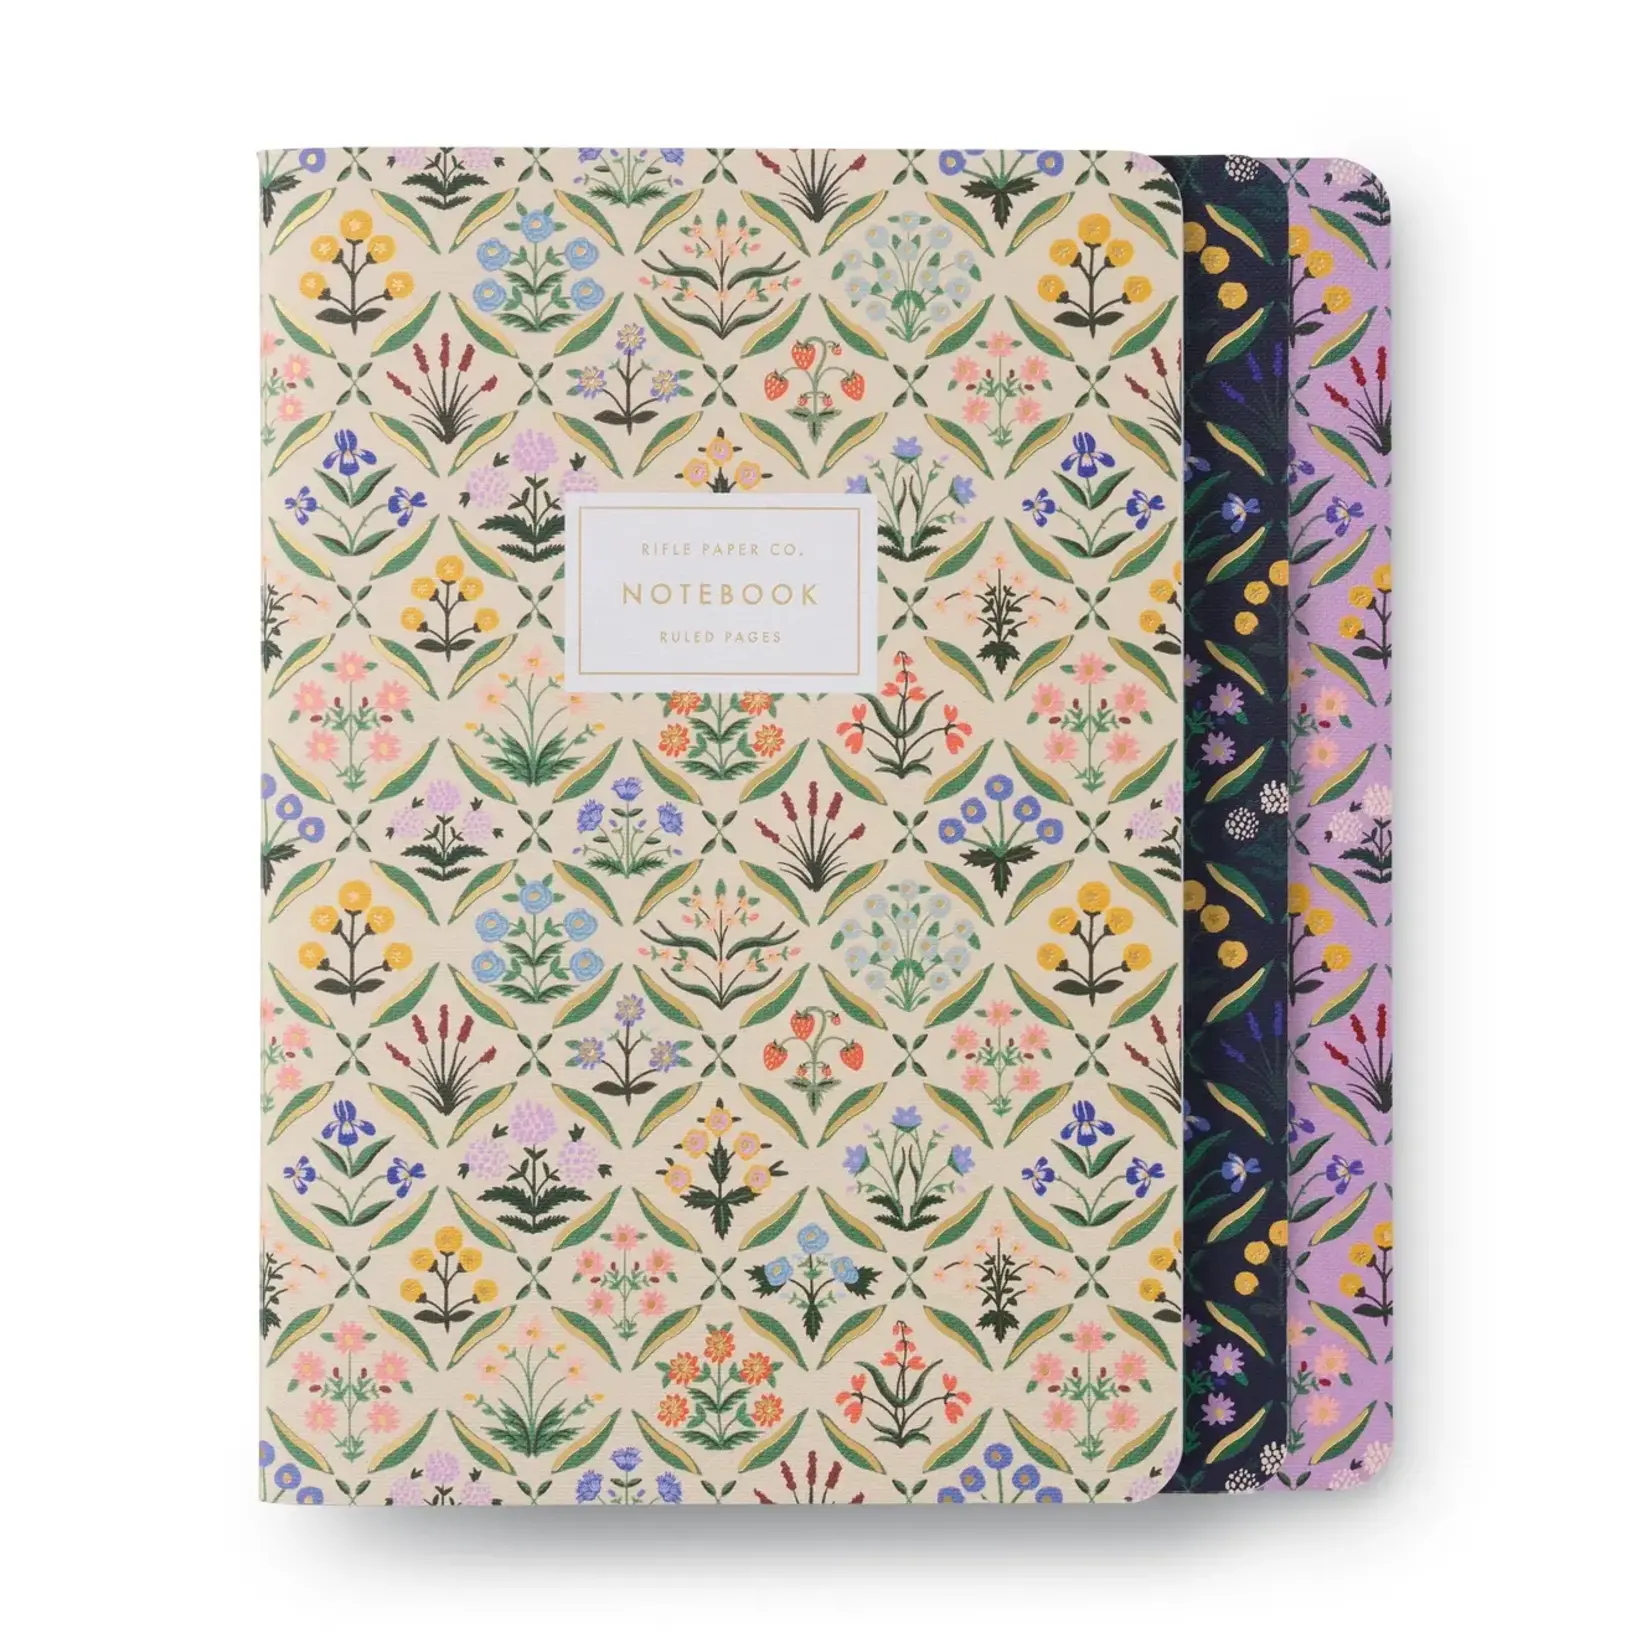 Rifle Paper Company Assorted Set of 3 Estee Notebooks